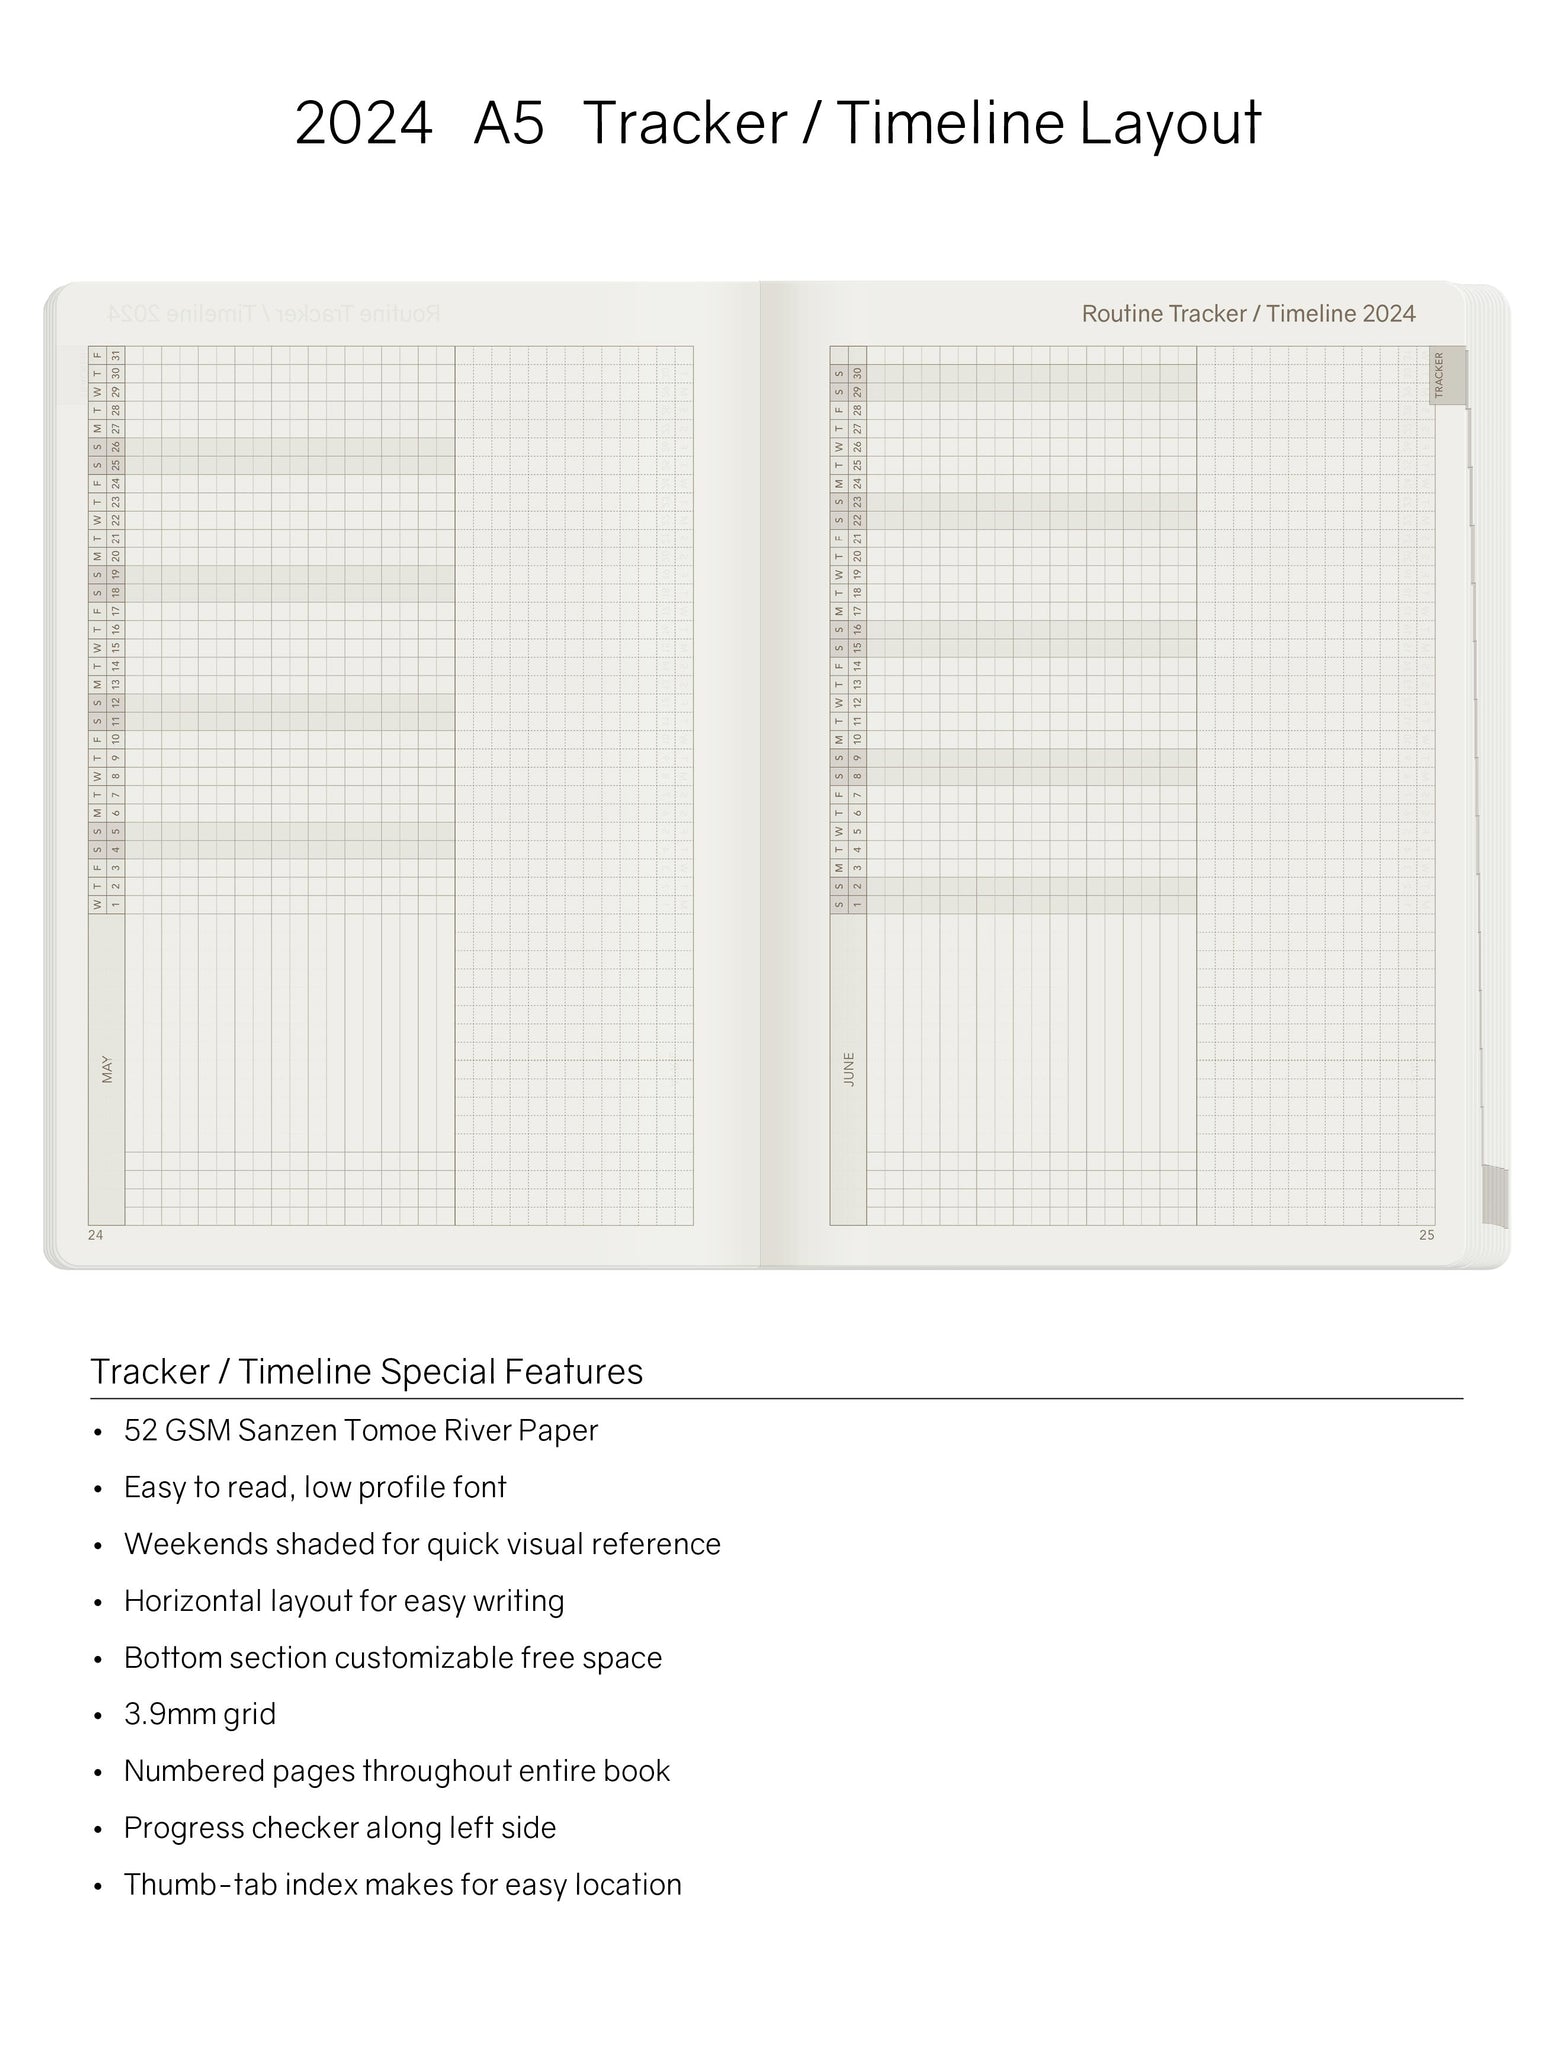 2024 A5 Weekly Planner - 52gsm Tomoe River Paper (All in One Unstacked)